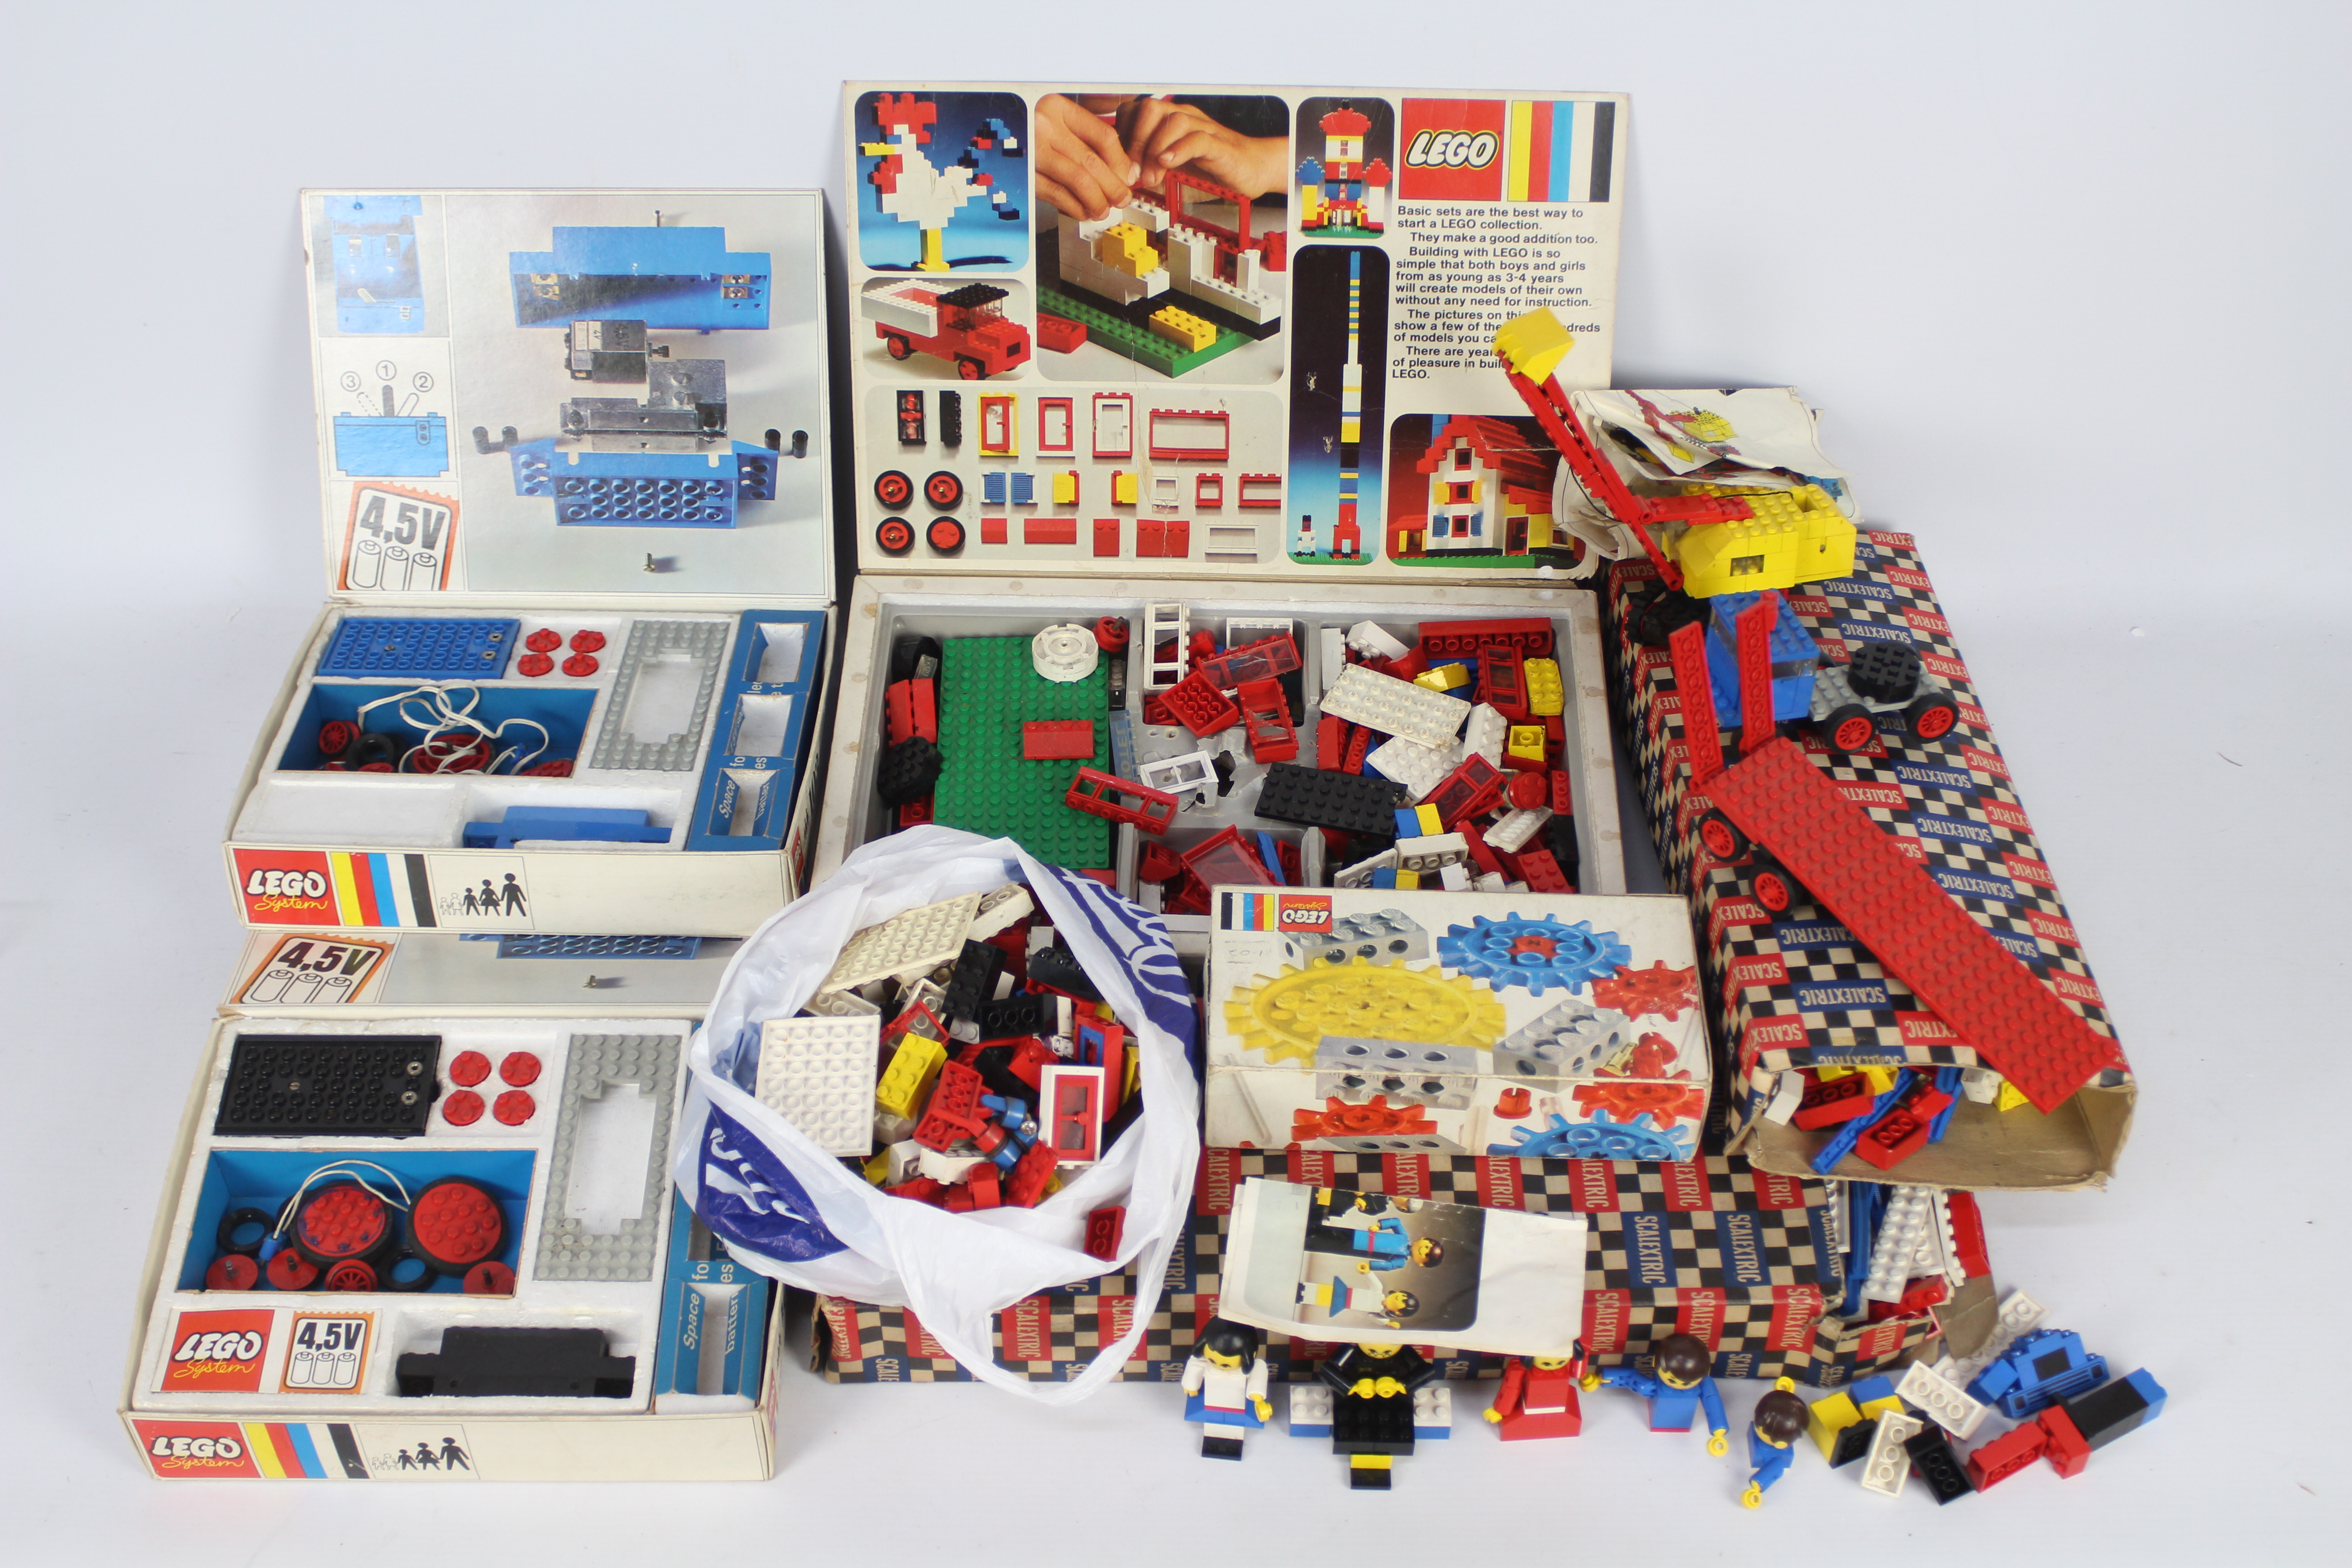 Lego -Four boxed vintage Lego sets and approximately 2.